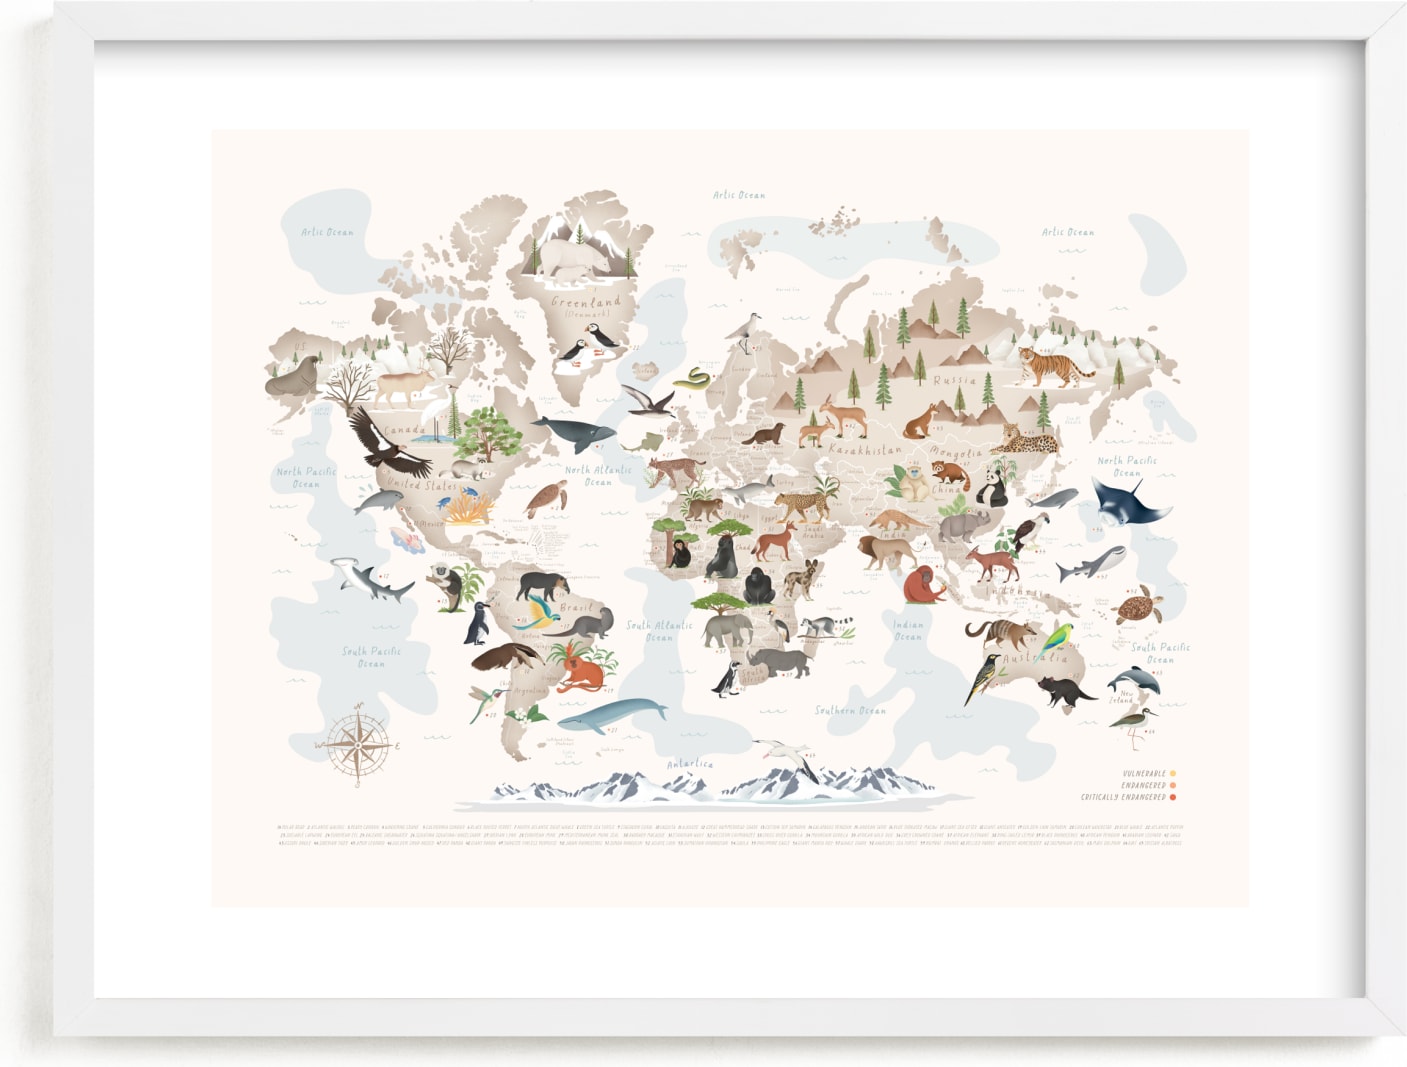 This is a ivory art by Sabrin Deirani called Animals World map, 65 threatened species.